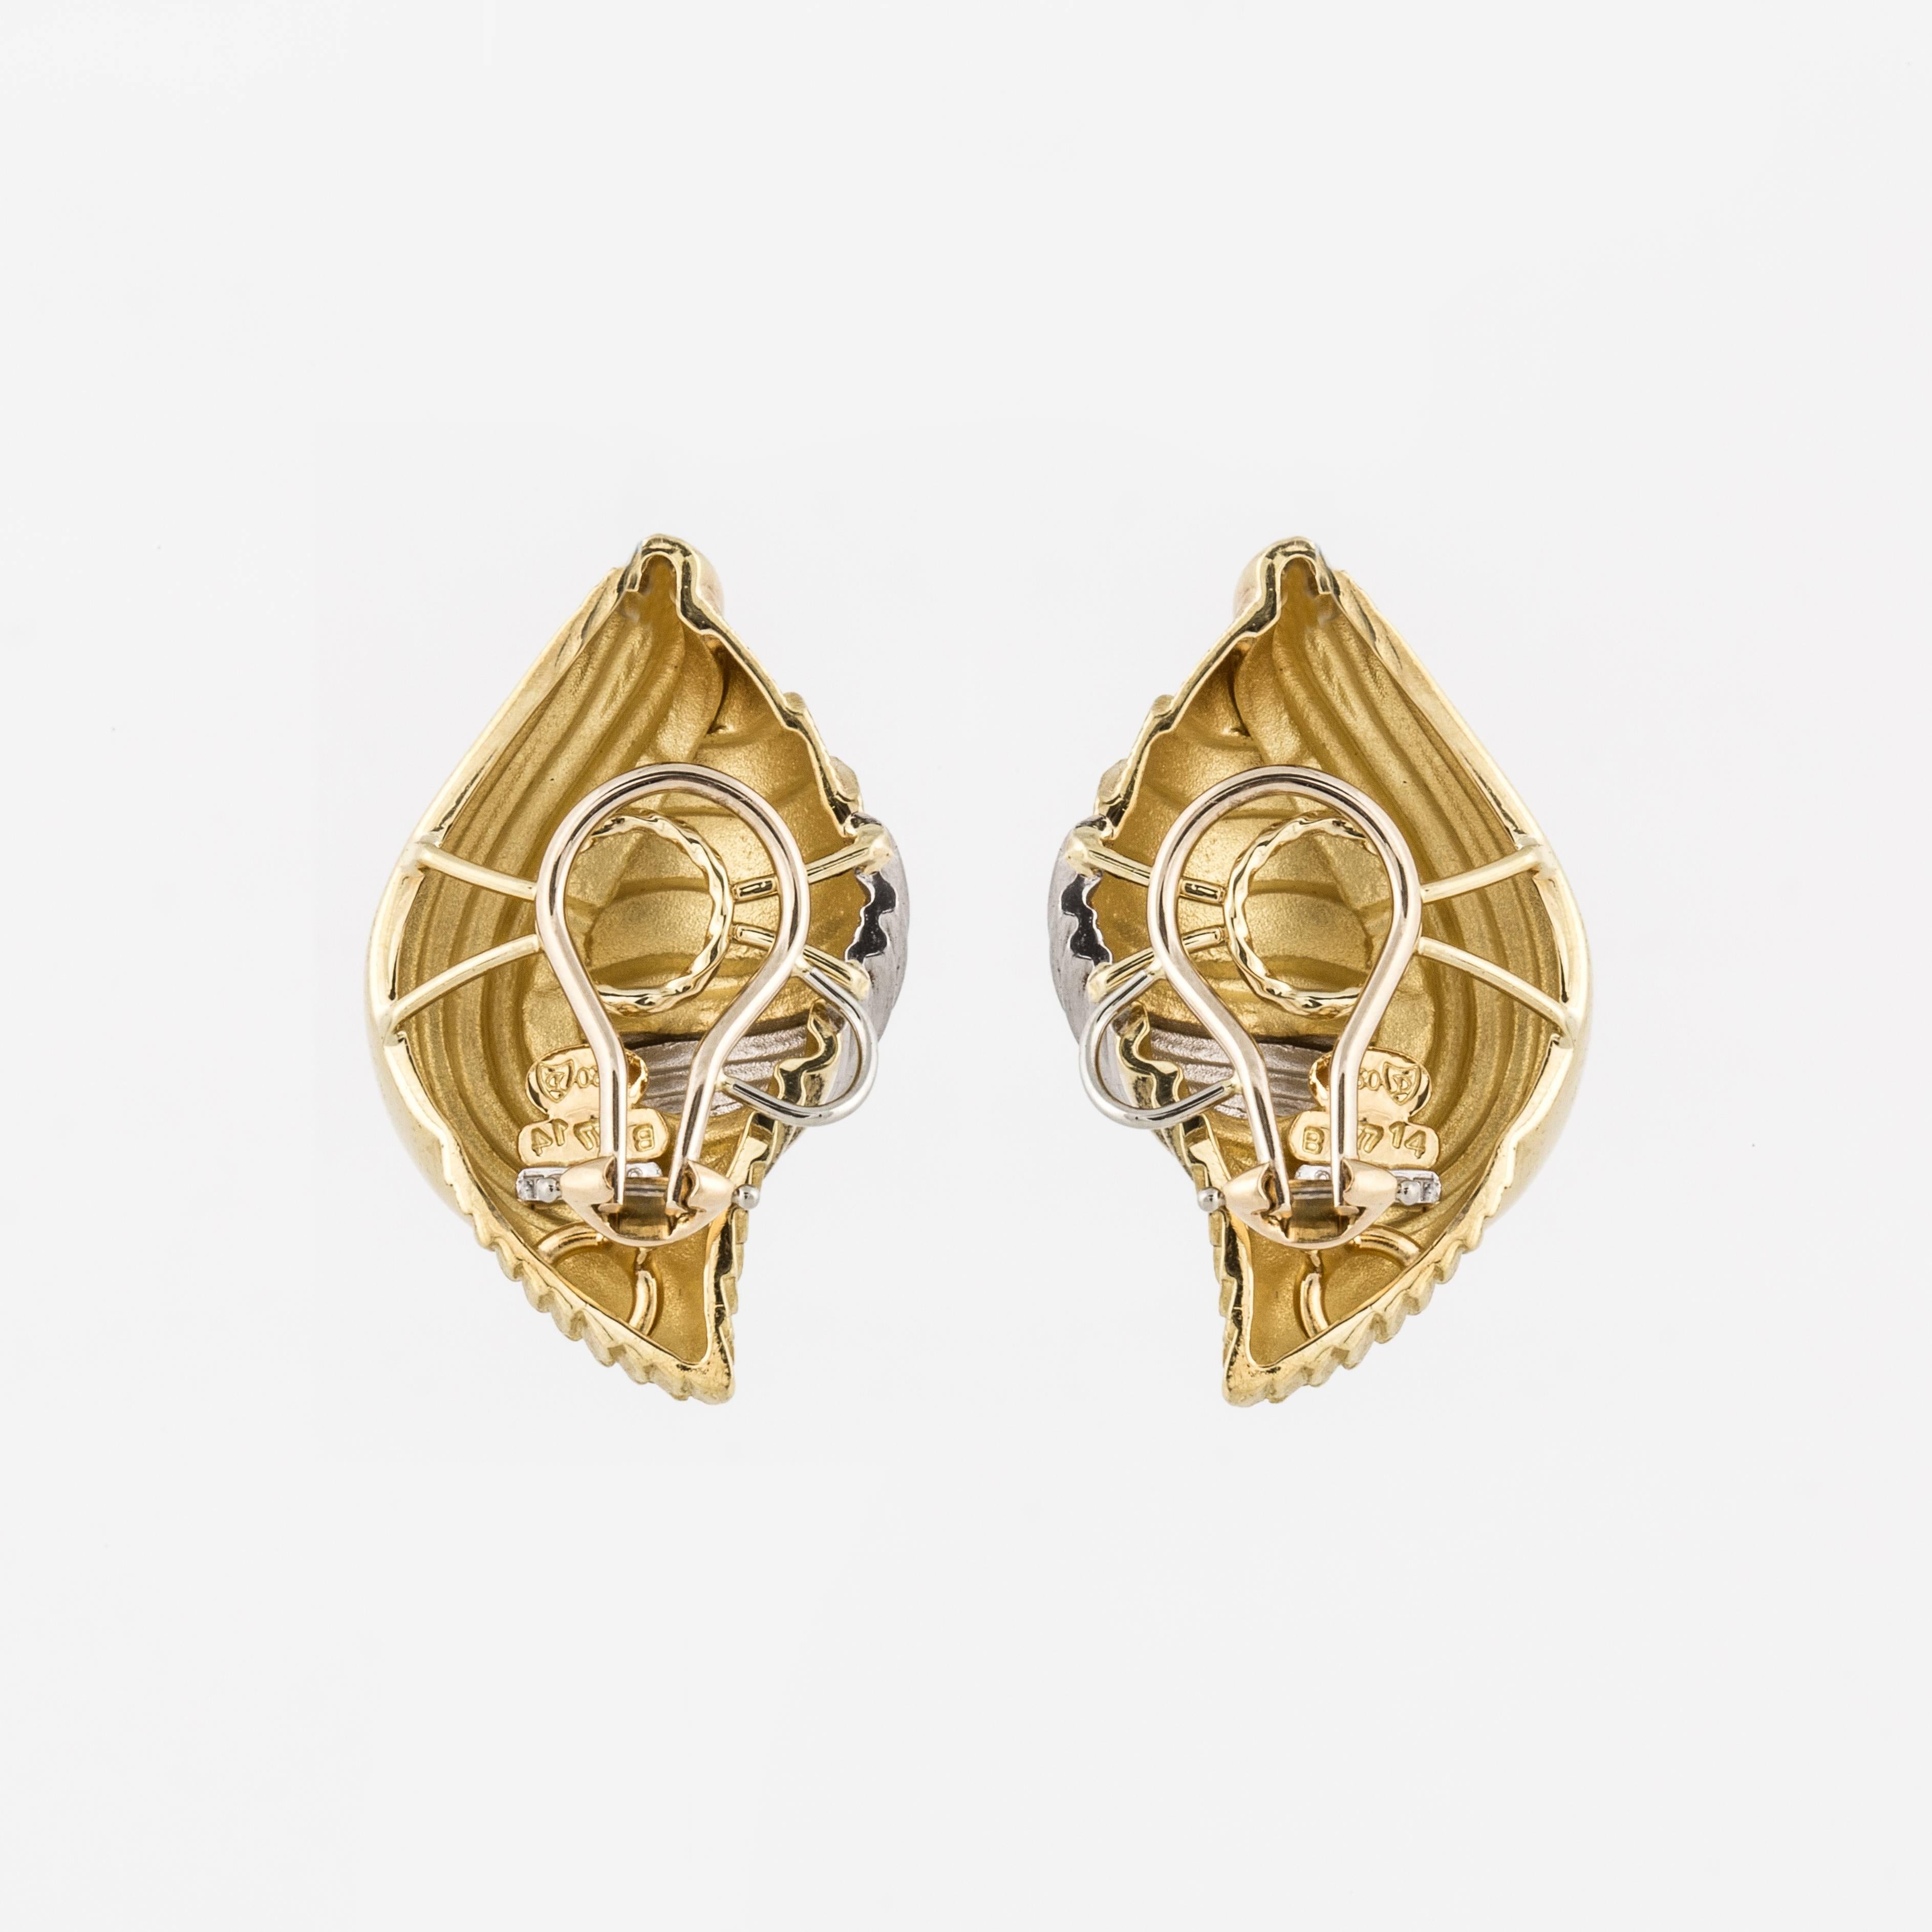 Henry Dunay earrings depicting shells in 18K yellow gold and platinum with a high polish finish in conjunction with a satin finish.  They measure 1 3/8 inches long, 3/4 inches wide and 3/8 inches deep.  They have clip backs.  The earrings are marked